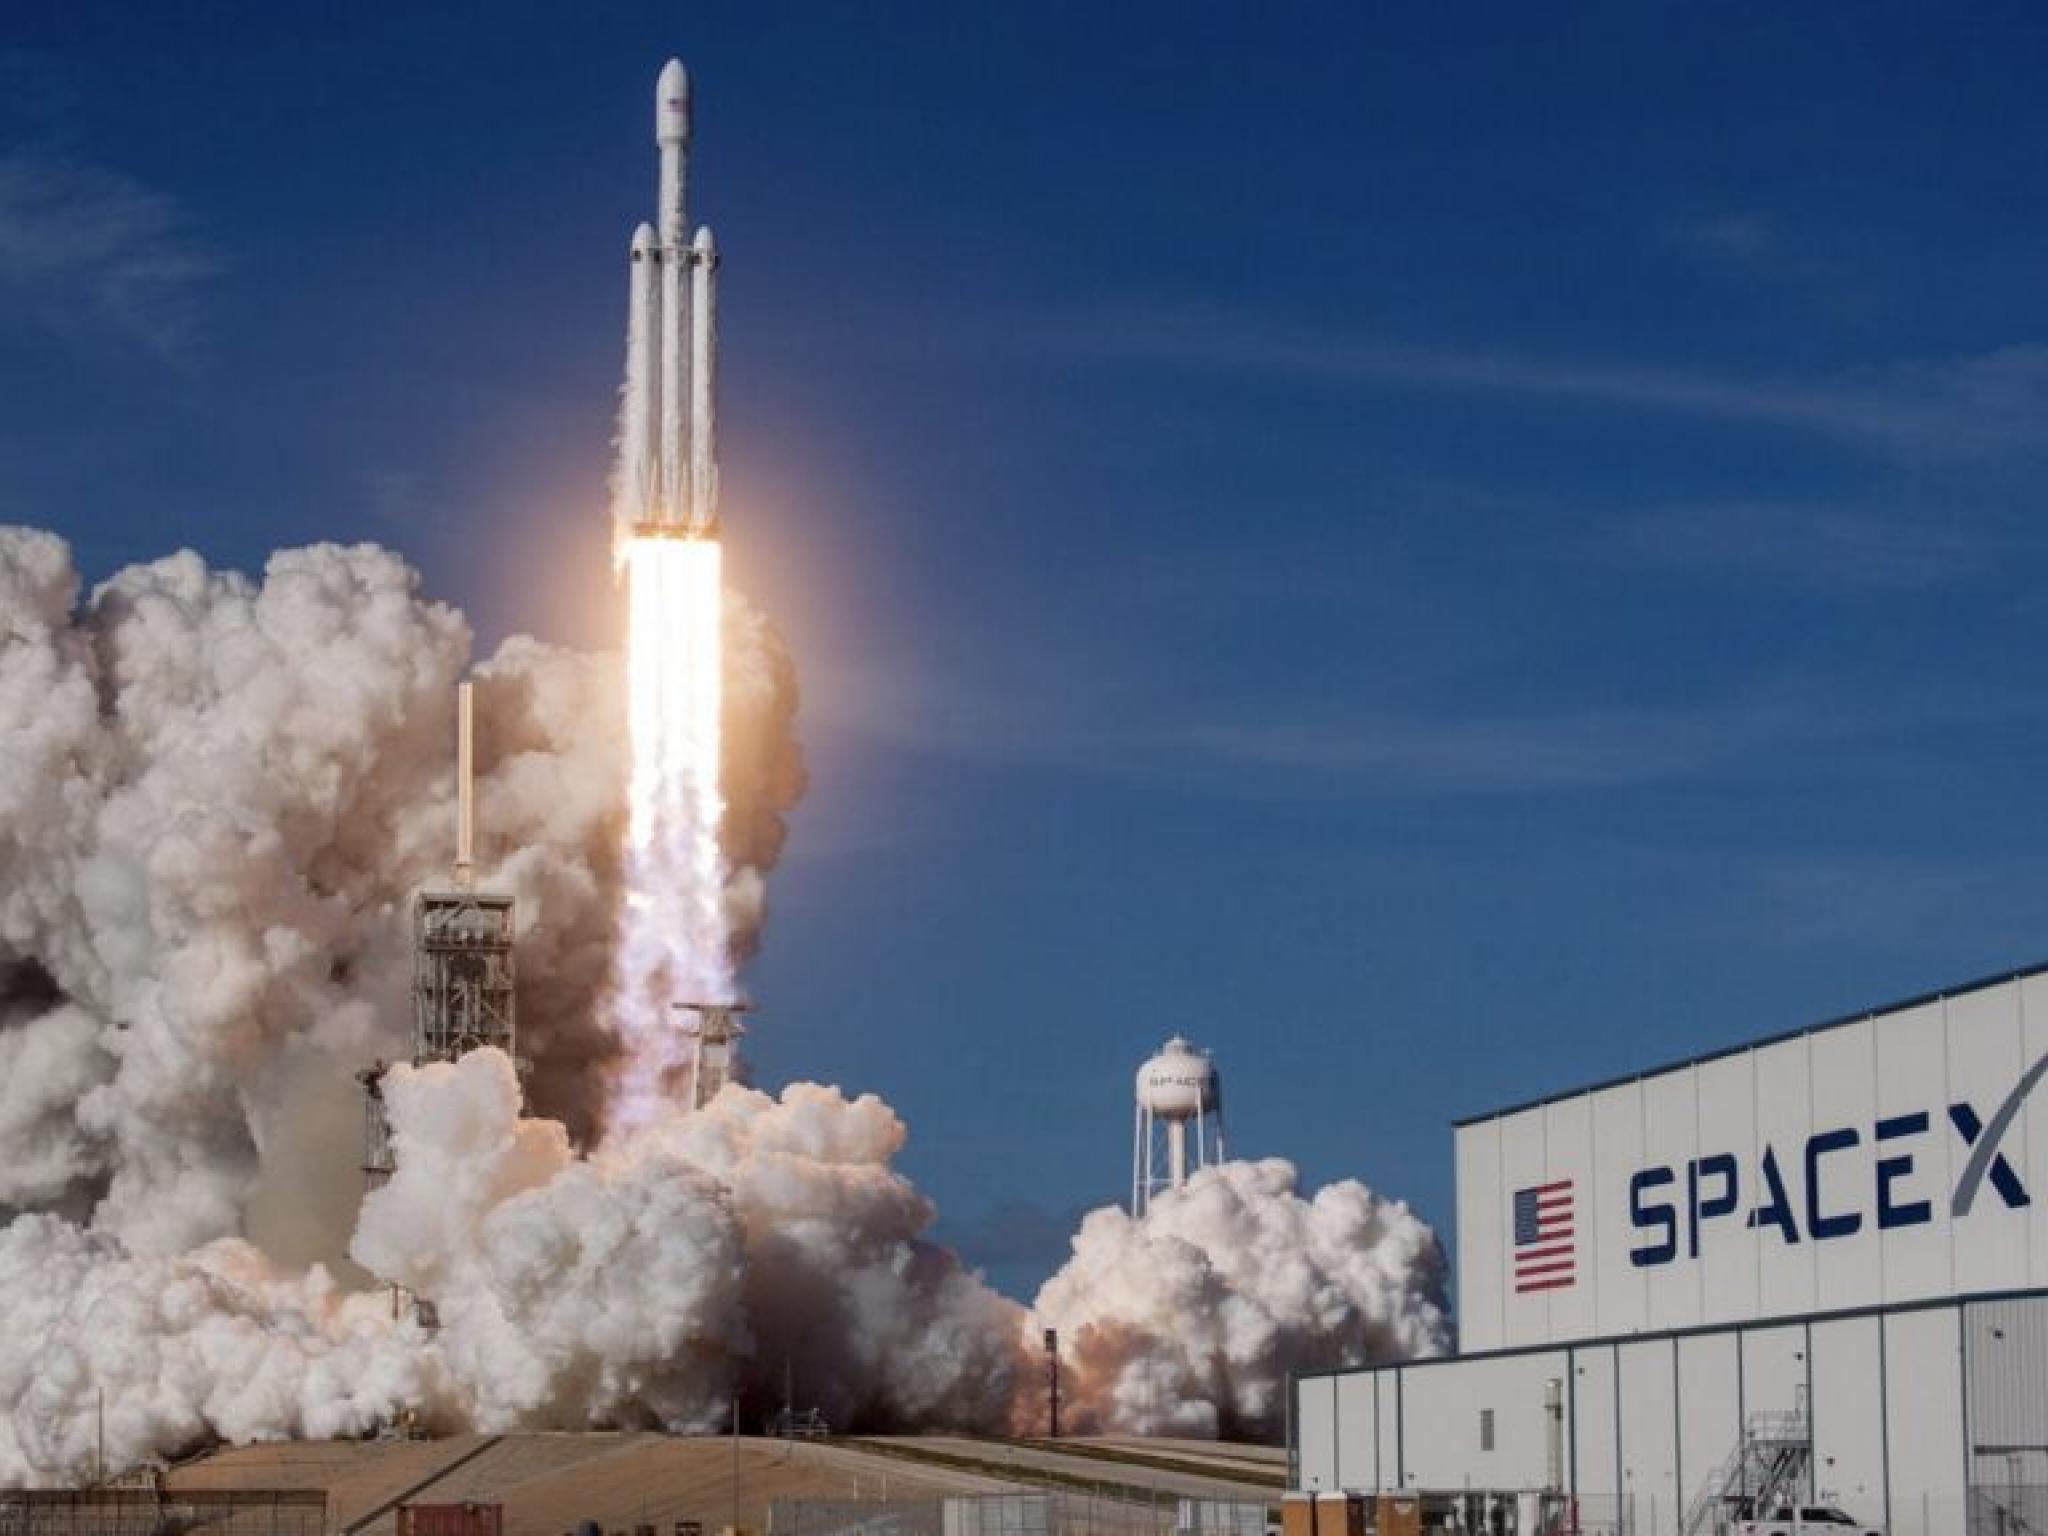  spacex-overtakes-ula-in-military-space-missions-as-vulcan-centaur-rocket-experiences-delays 